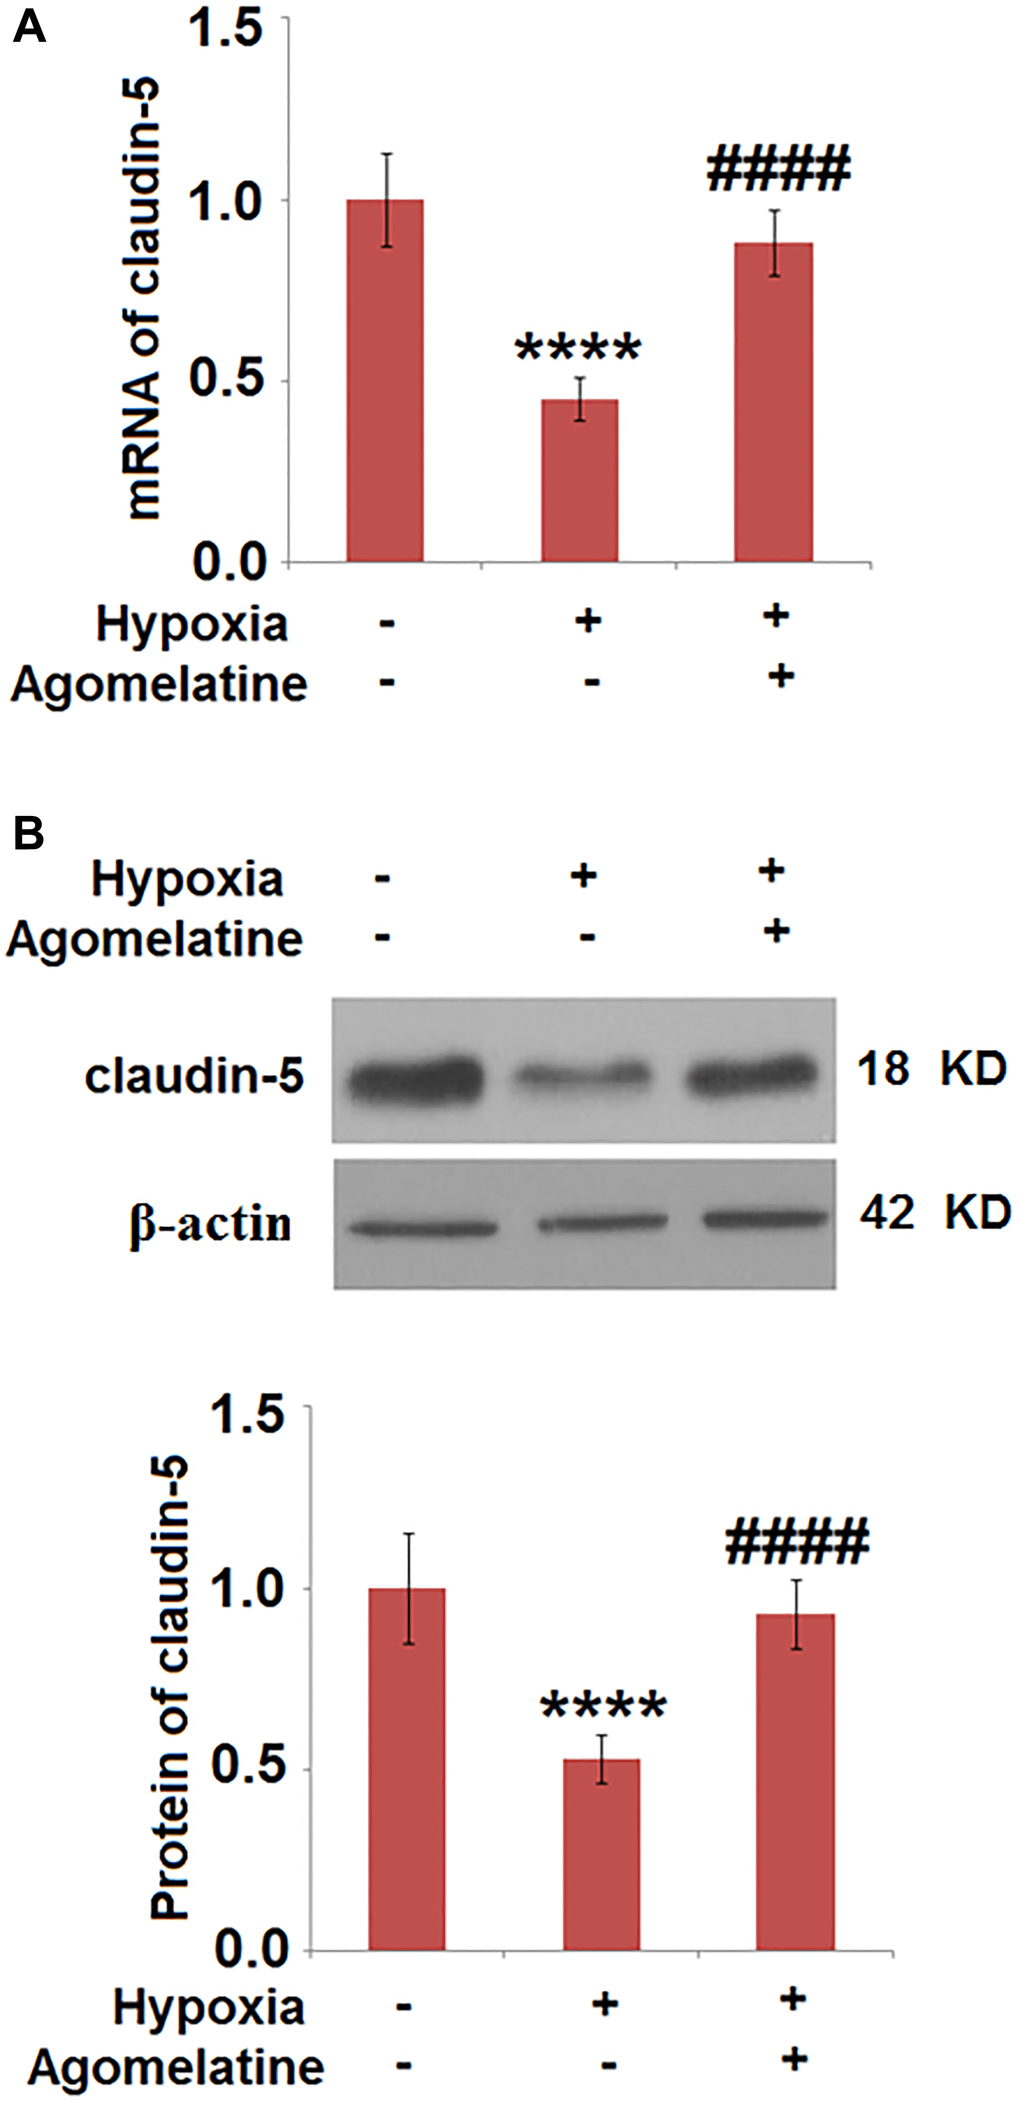 Agomelatine restored the expression of claudin-5 in hypoxic endothelial cells. Brain bEnd.3 endothelial cells were incubated with 10 μM Agomelatine in the process of hypoxia/ reperfusion (H/R). (A). mRNA of claudin-5 as measured by real-time PCR; (B). Protein expression of claudin-5 as measured by western blot analysis (****P ####P 